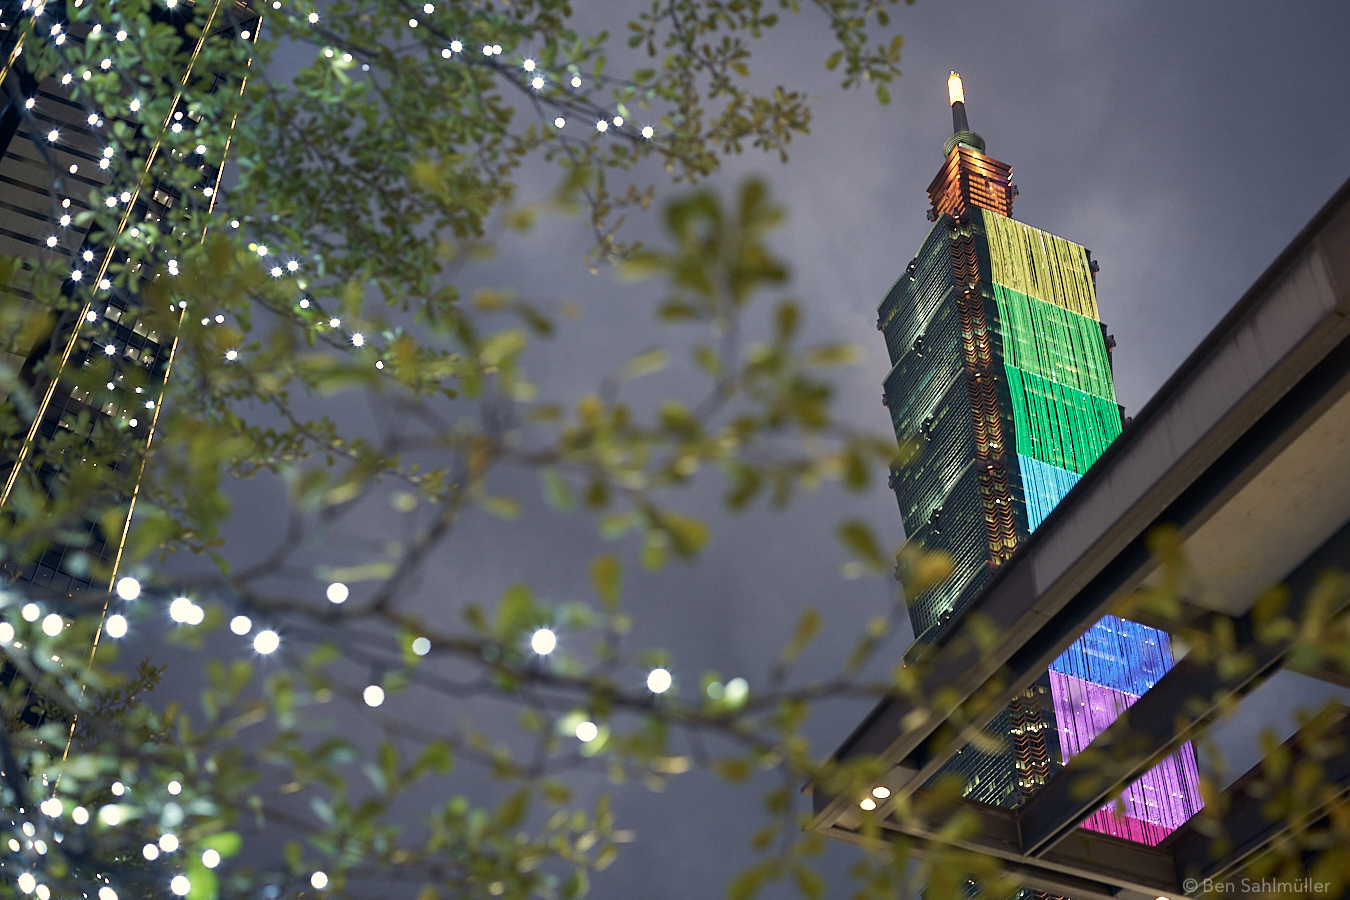 Taipei 101, as seen from a street below it. The branch of a tree seem to stretch towards it. There are warm fairy lights on the branch. At its north side, Taipei 101 is dressed by a giant LED screen which points towards us. The LEDs are lightened in rainbow colors.